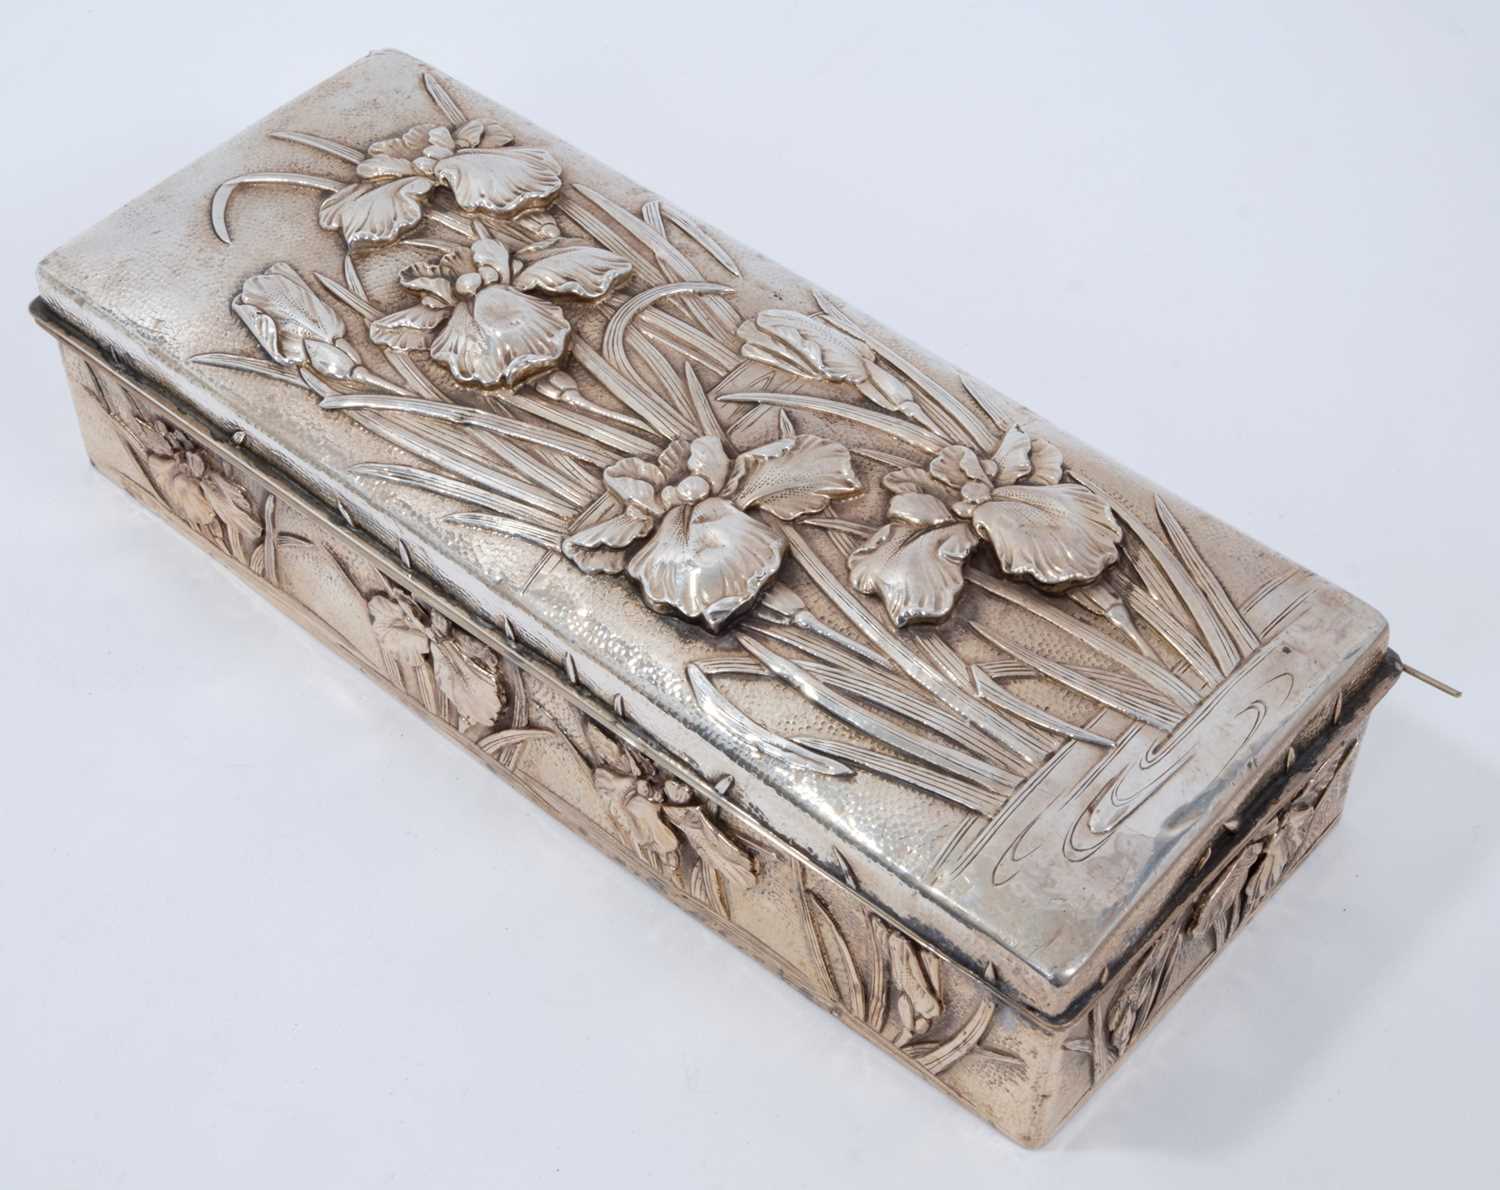 Late 19th/early 20th century Japanese silver box of rectangular form, with Iris floral decoration - Image 2 of 3